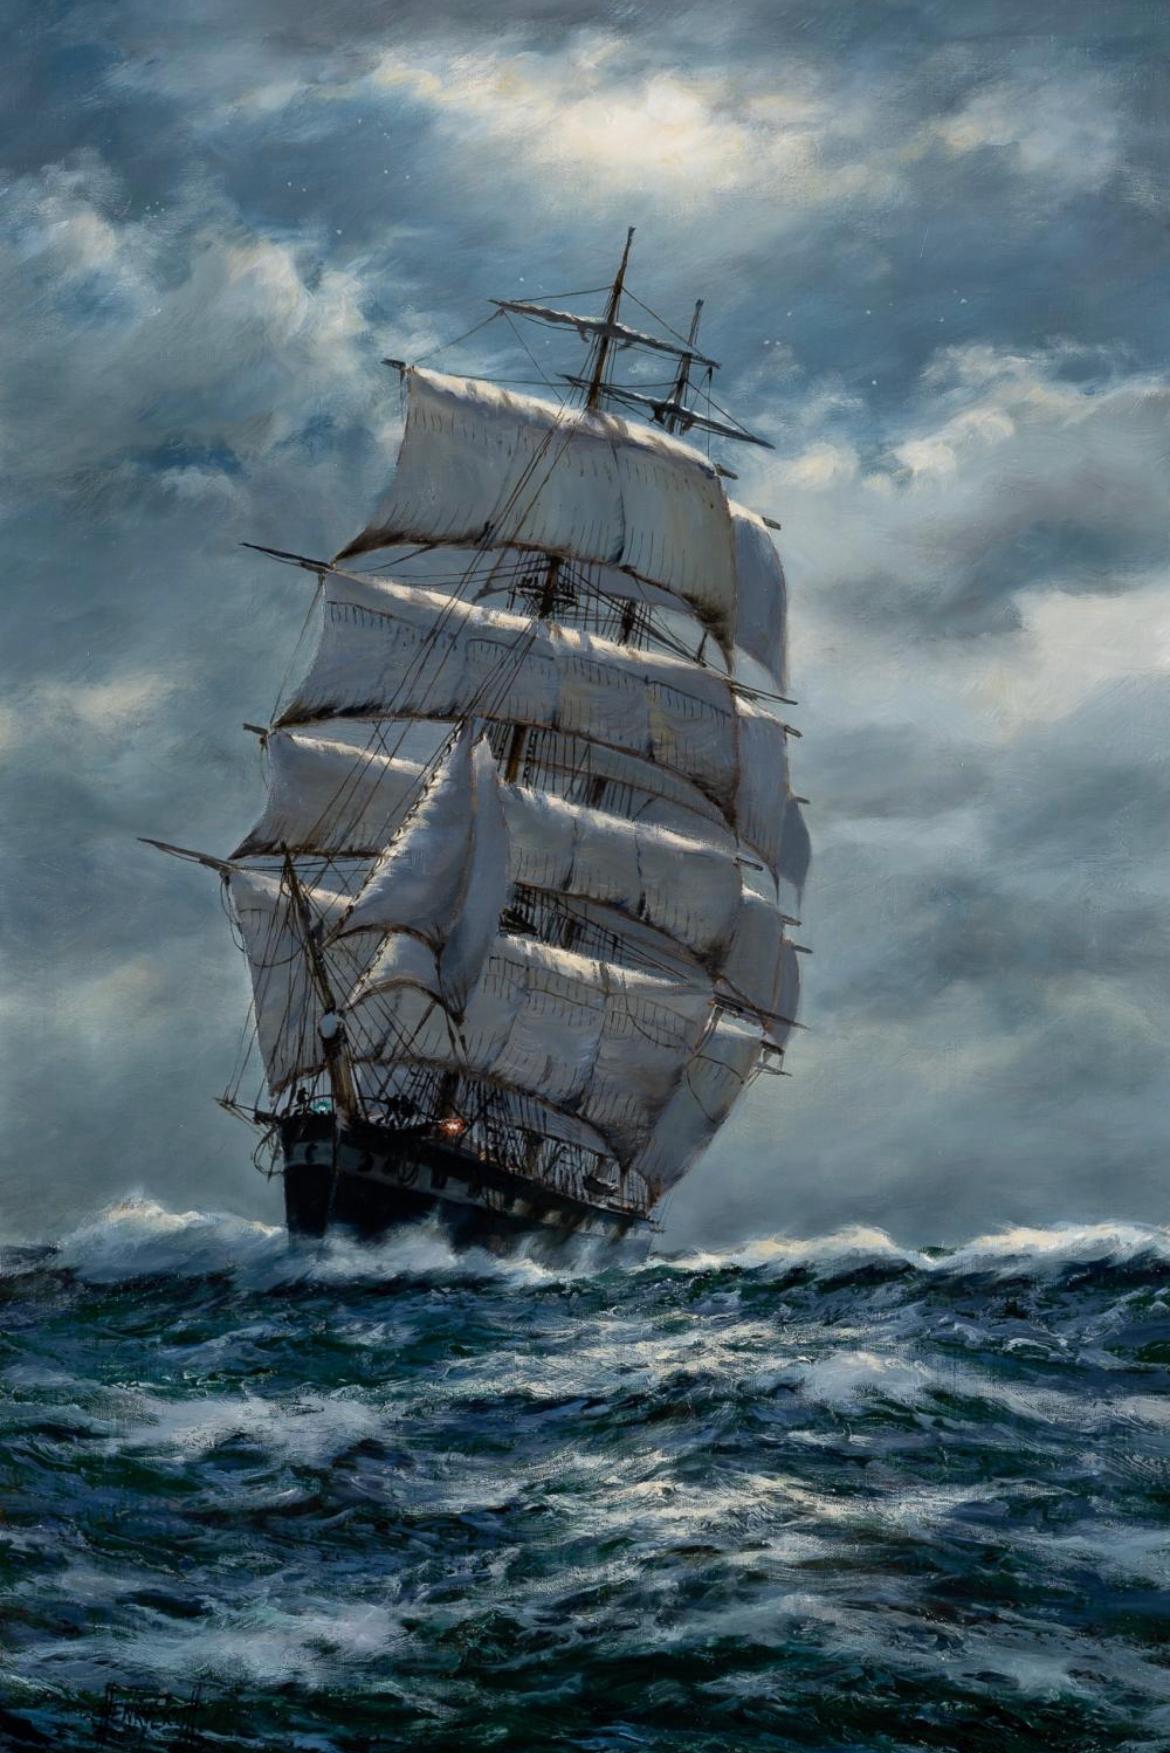 The tea clipper Arctic Moon, an oil on canvas by British artist Henry Scott. Signed in the lower left. Provenance: MacConnall-Mason, London. The painting measures: 30